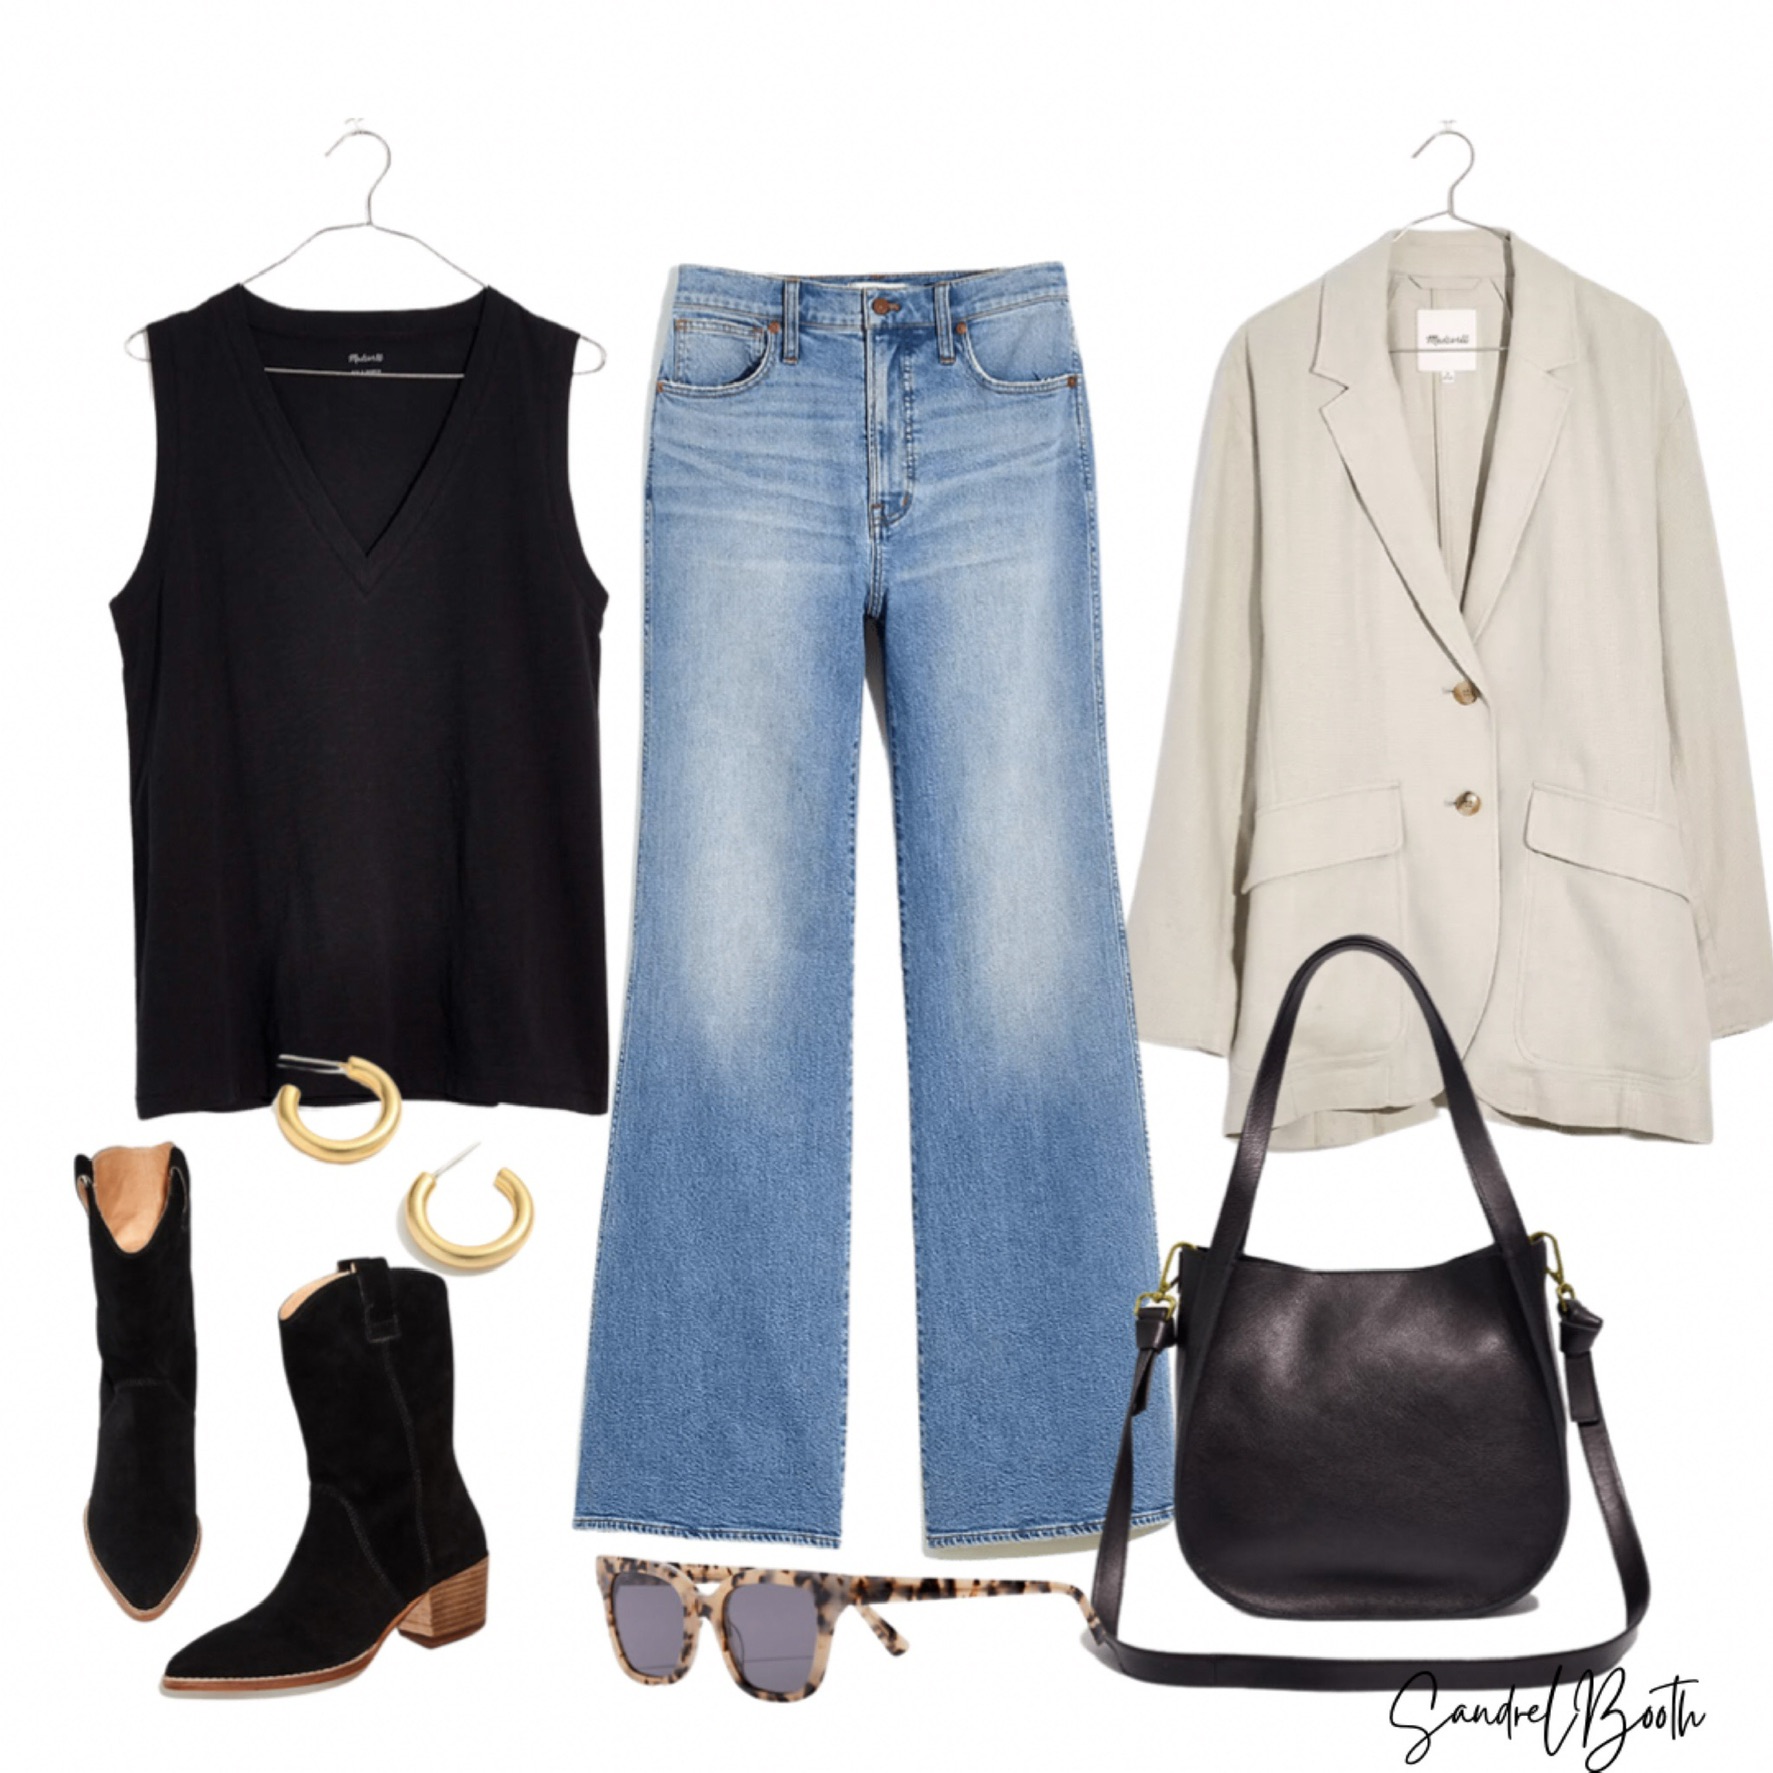 Easy fall style- Madewell denim flares and black tank, with a neutral blazer